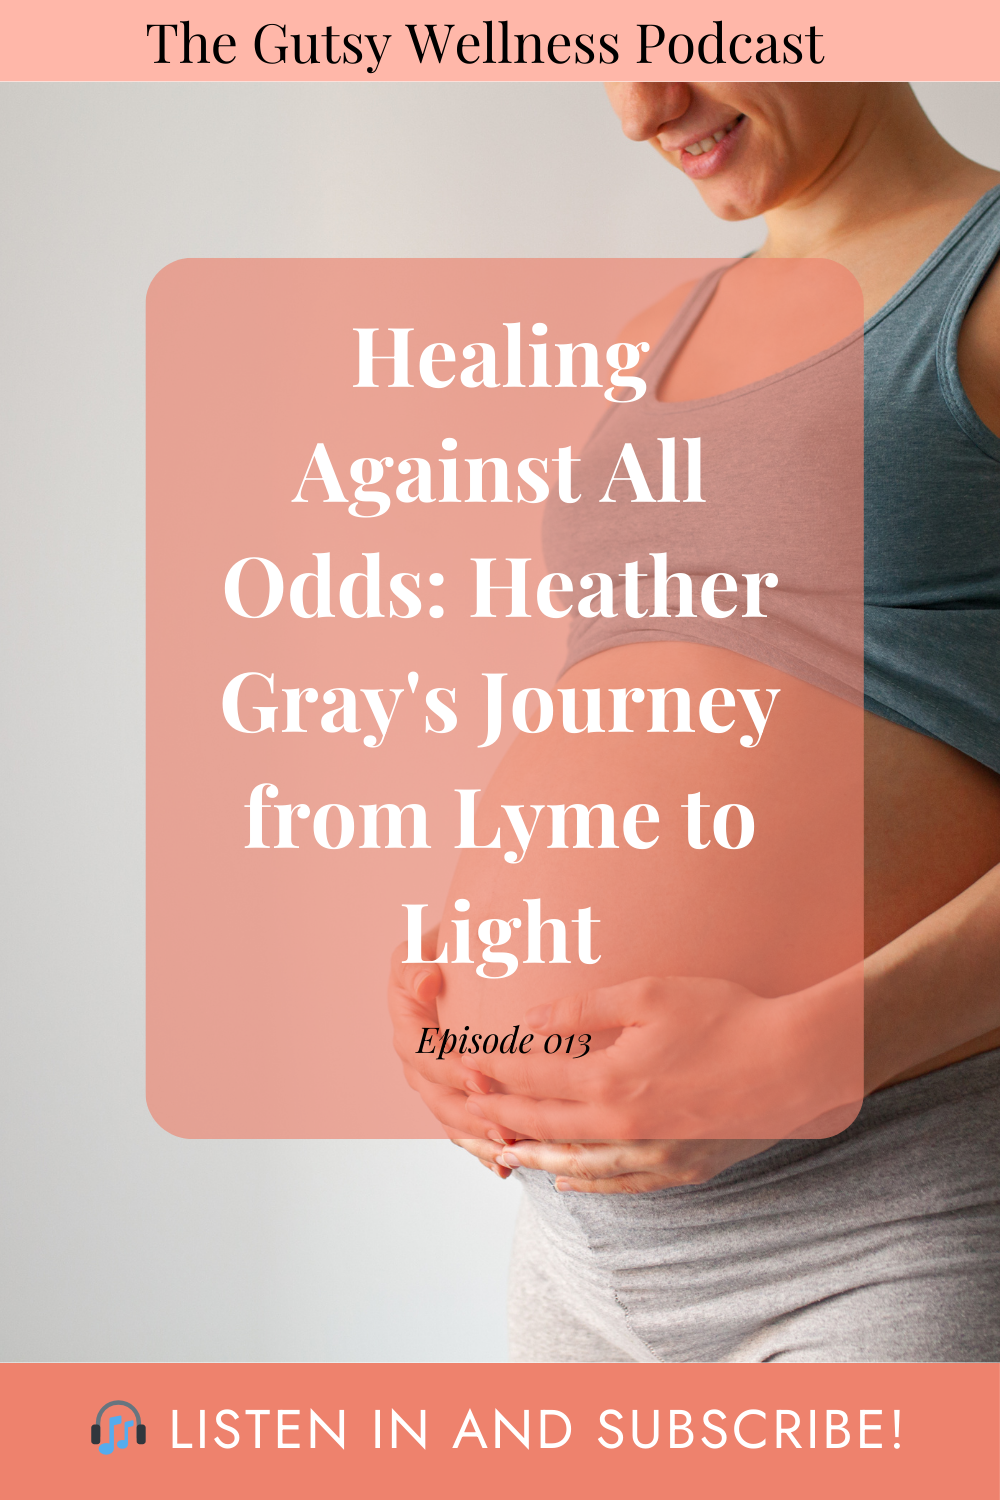 Healing Against All Odds: Heather Gray’s Journey from Lyme to Light